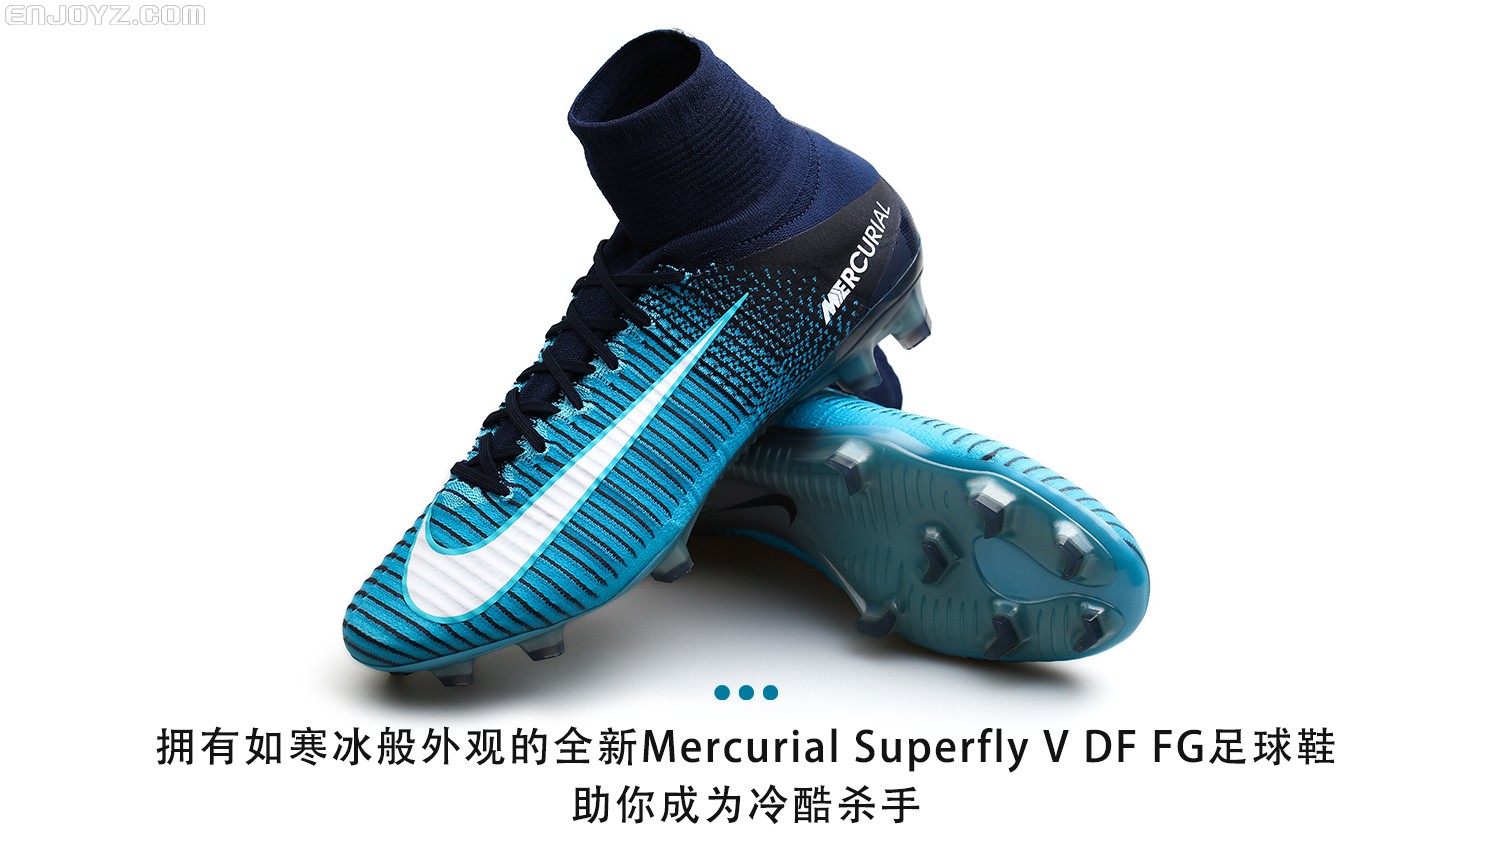 Nike Game Over Mercurial Superfly 2019.02 YouTube